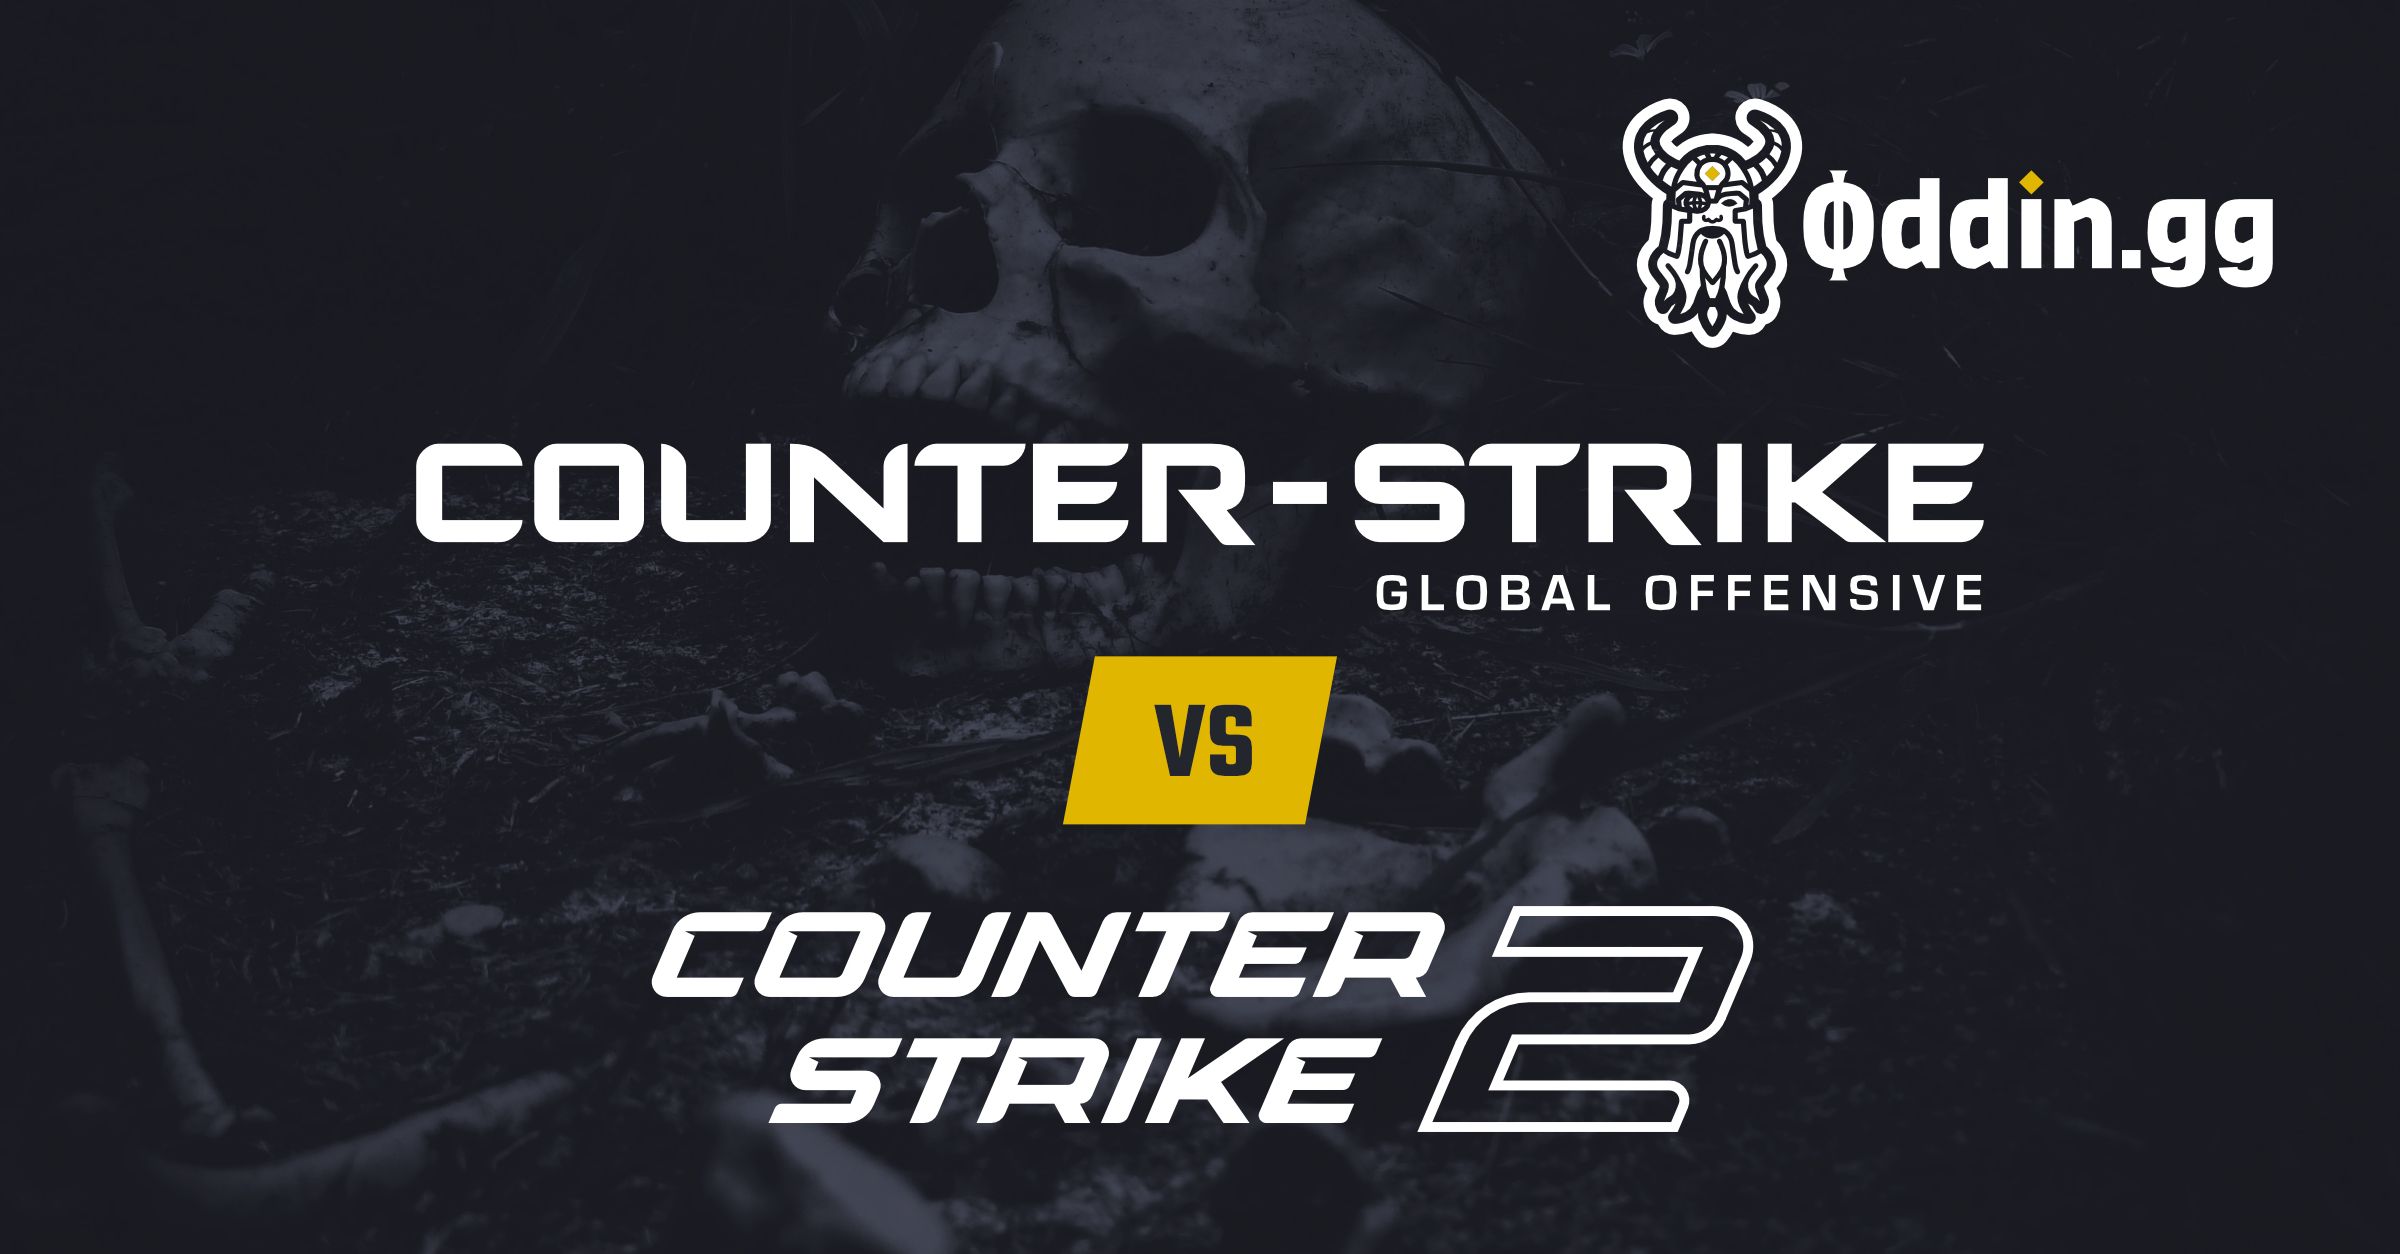 After 11 years of CS:GO, Counter-Strike 2 has officially replaced the  biggest game on Steam